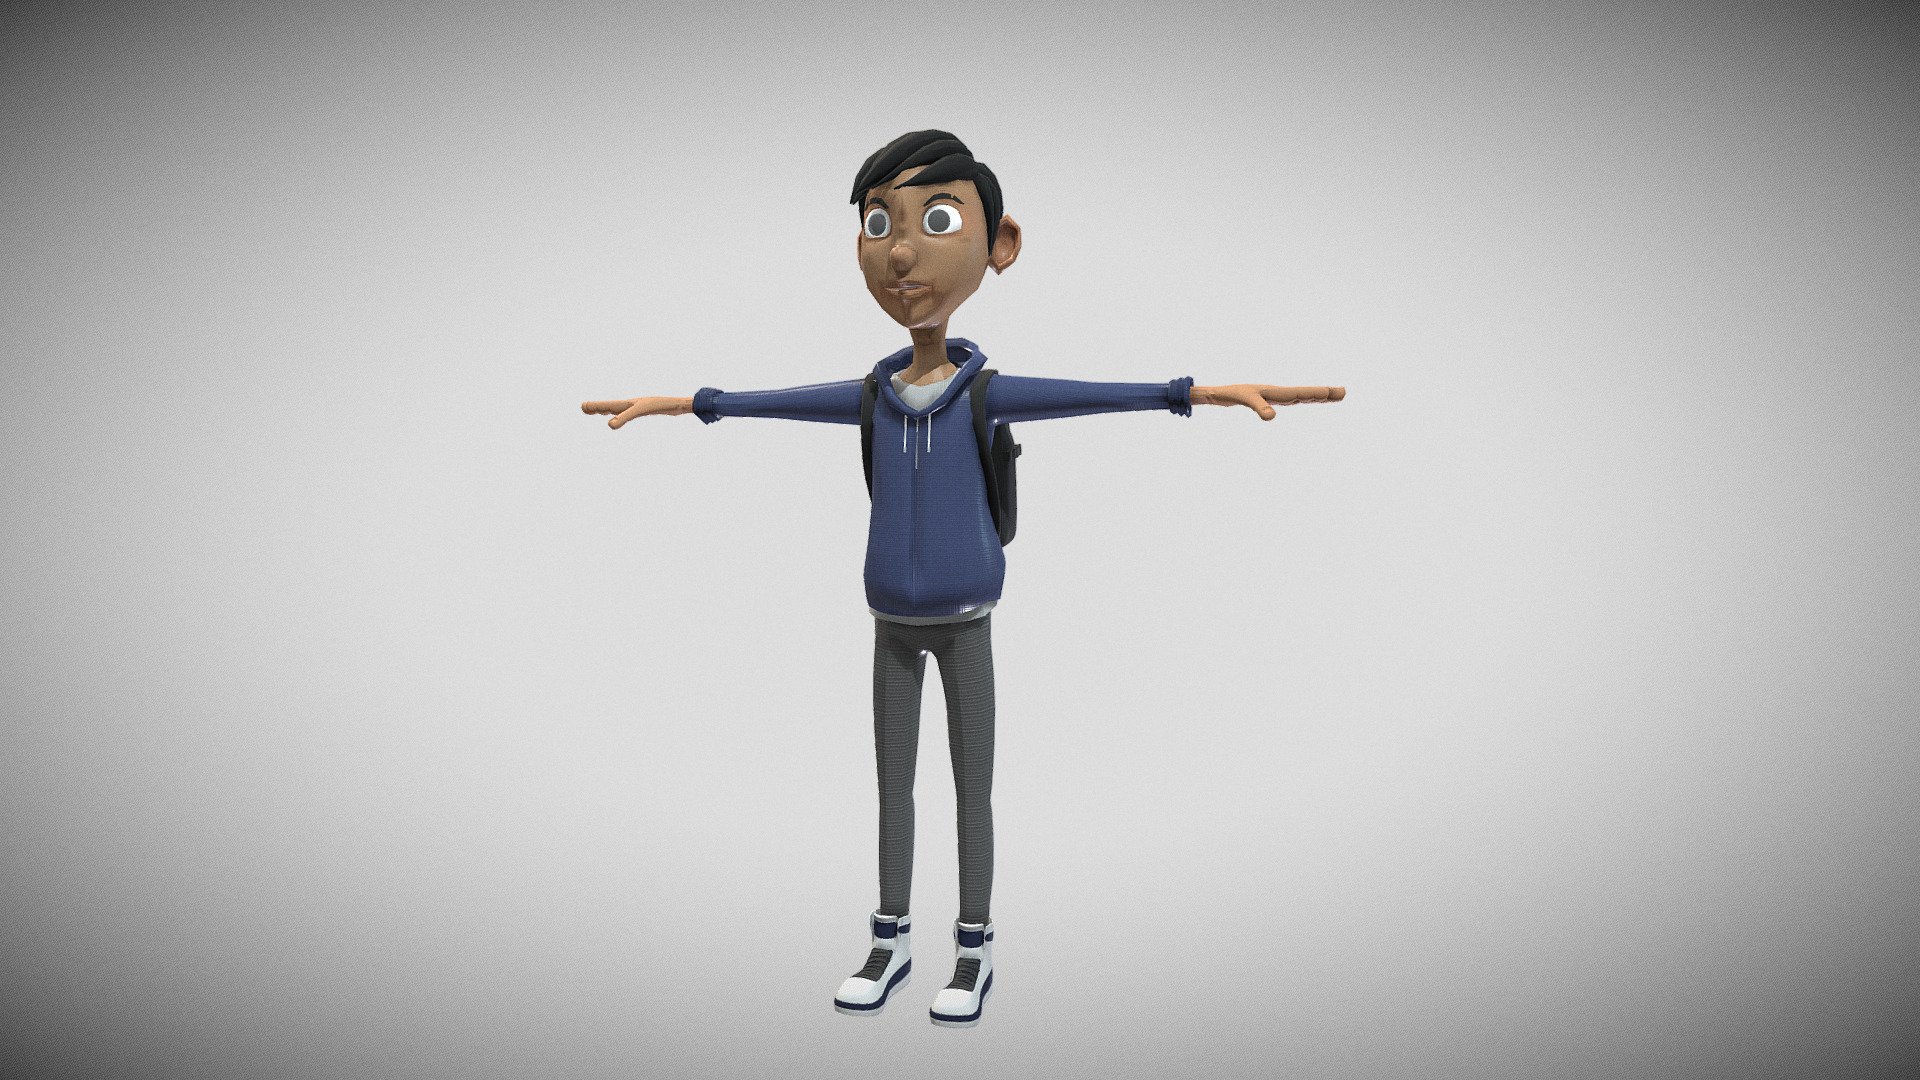 Kevin School boy character 2 Suits: School suit and home suit Ready for Augmented Reality, Virtual Reality and Video Games Ready to rig PBR Textures

If you need modification for the 3d Model you can contact us Hope you like it Thank you - School Boy Cartoon Character Lowpoly - 3D model by cuankiproduction 3d model